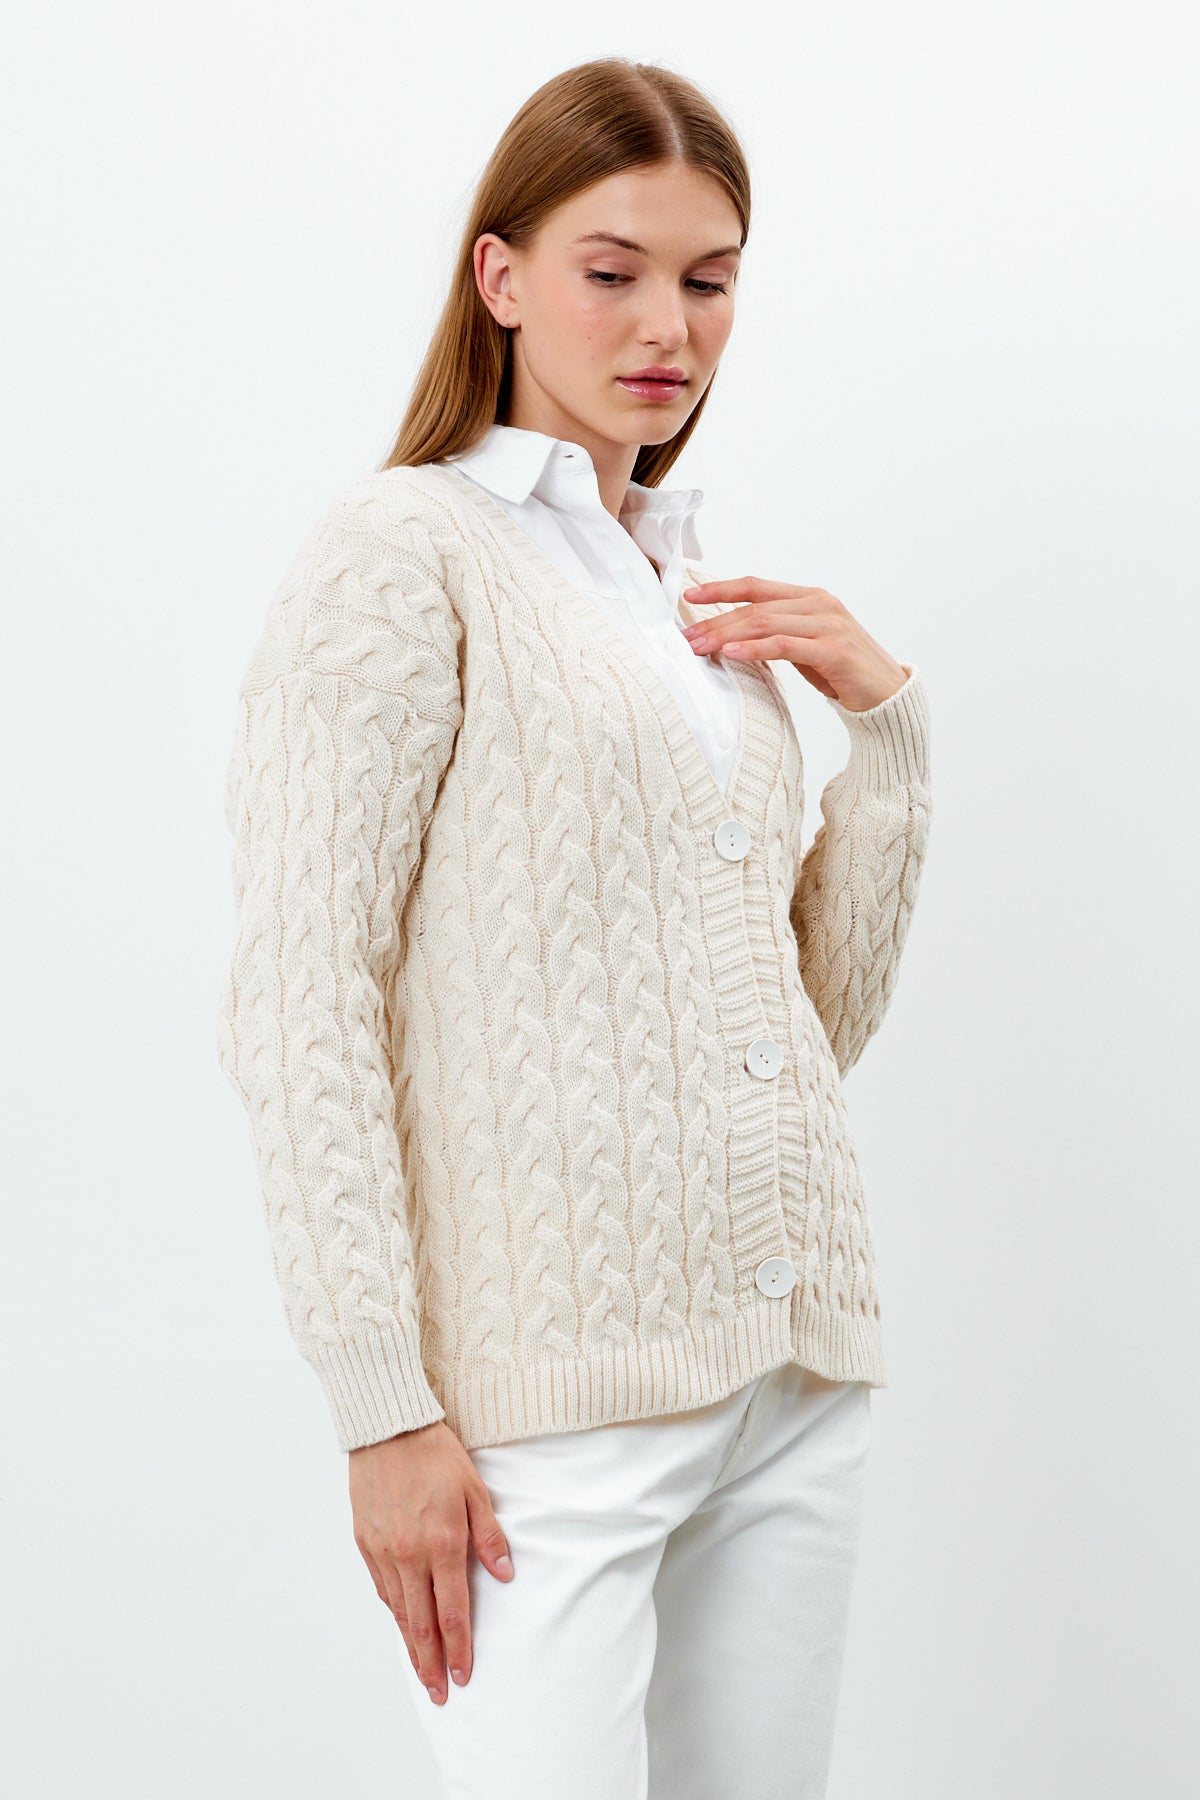 Solid Color Short Knit Cardigan Thick Knitted Details - SKU: 3790